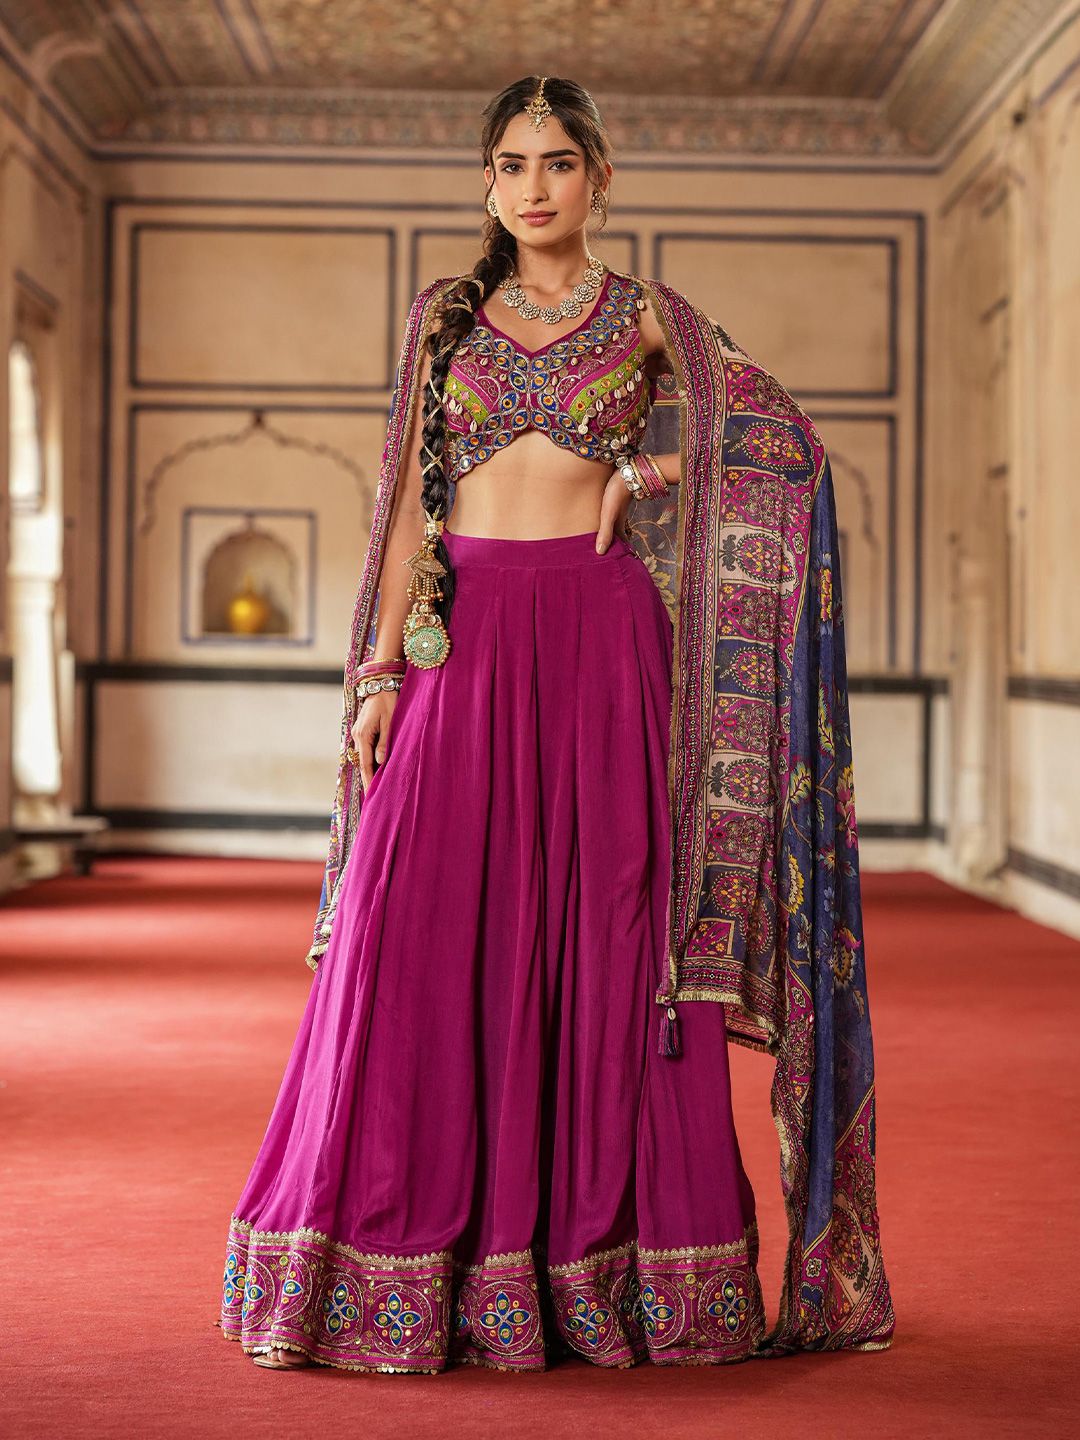 SCAKHI Embellished Ready To Wear Lehenga & Blouse With Dupatta Price in India